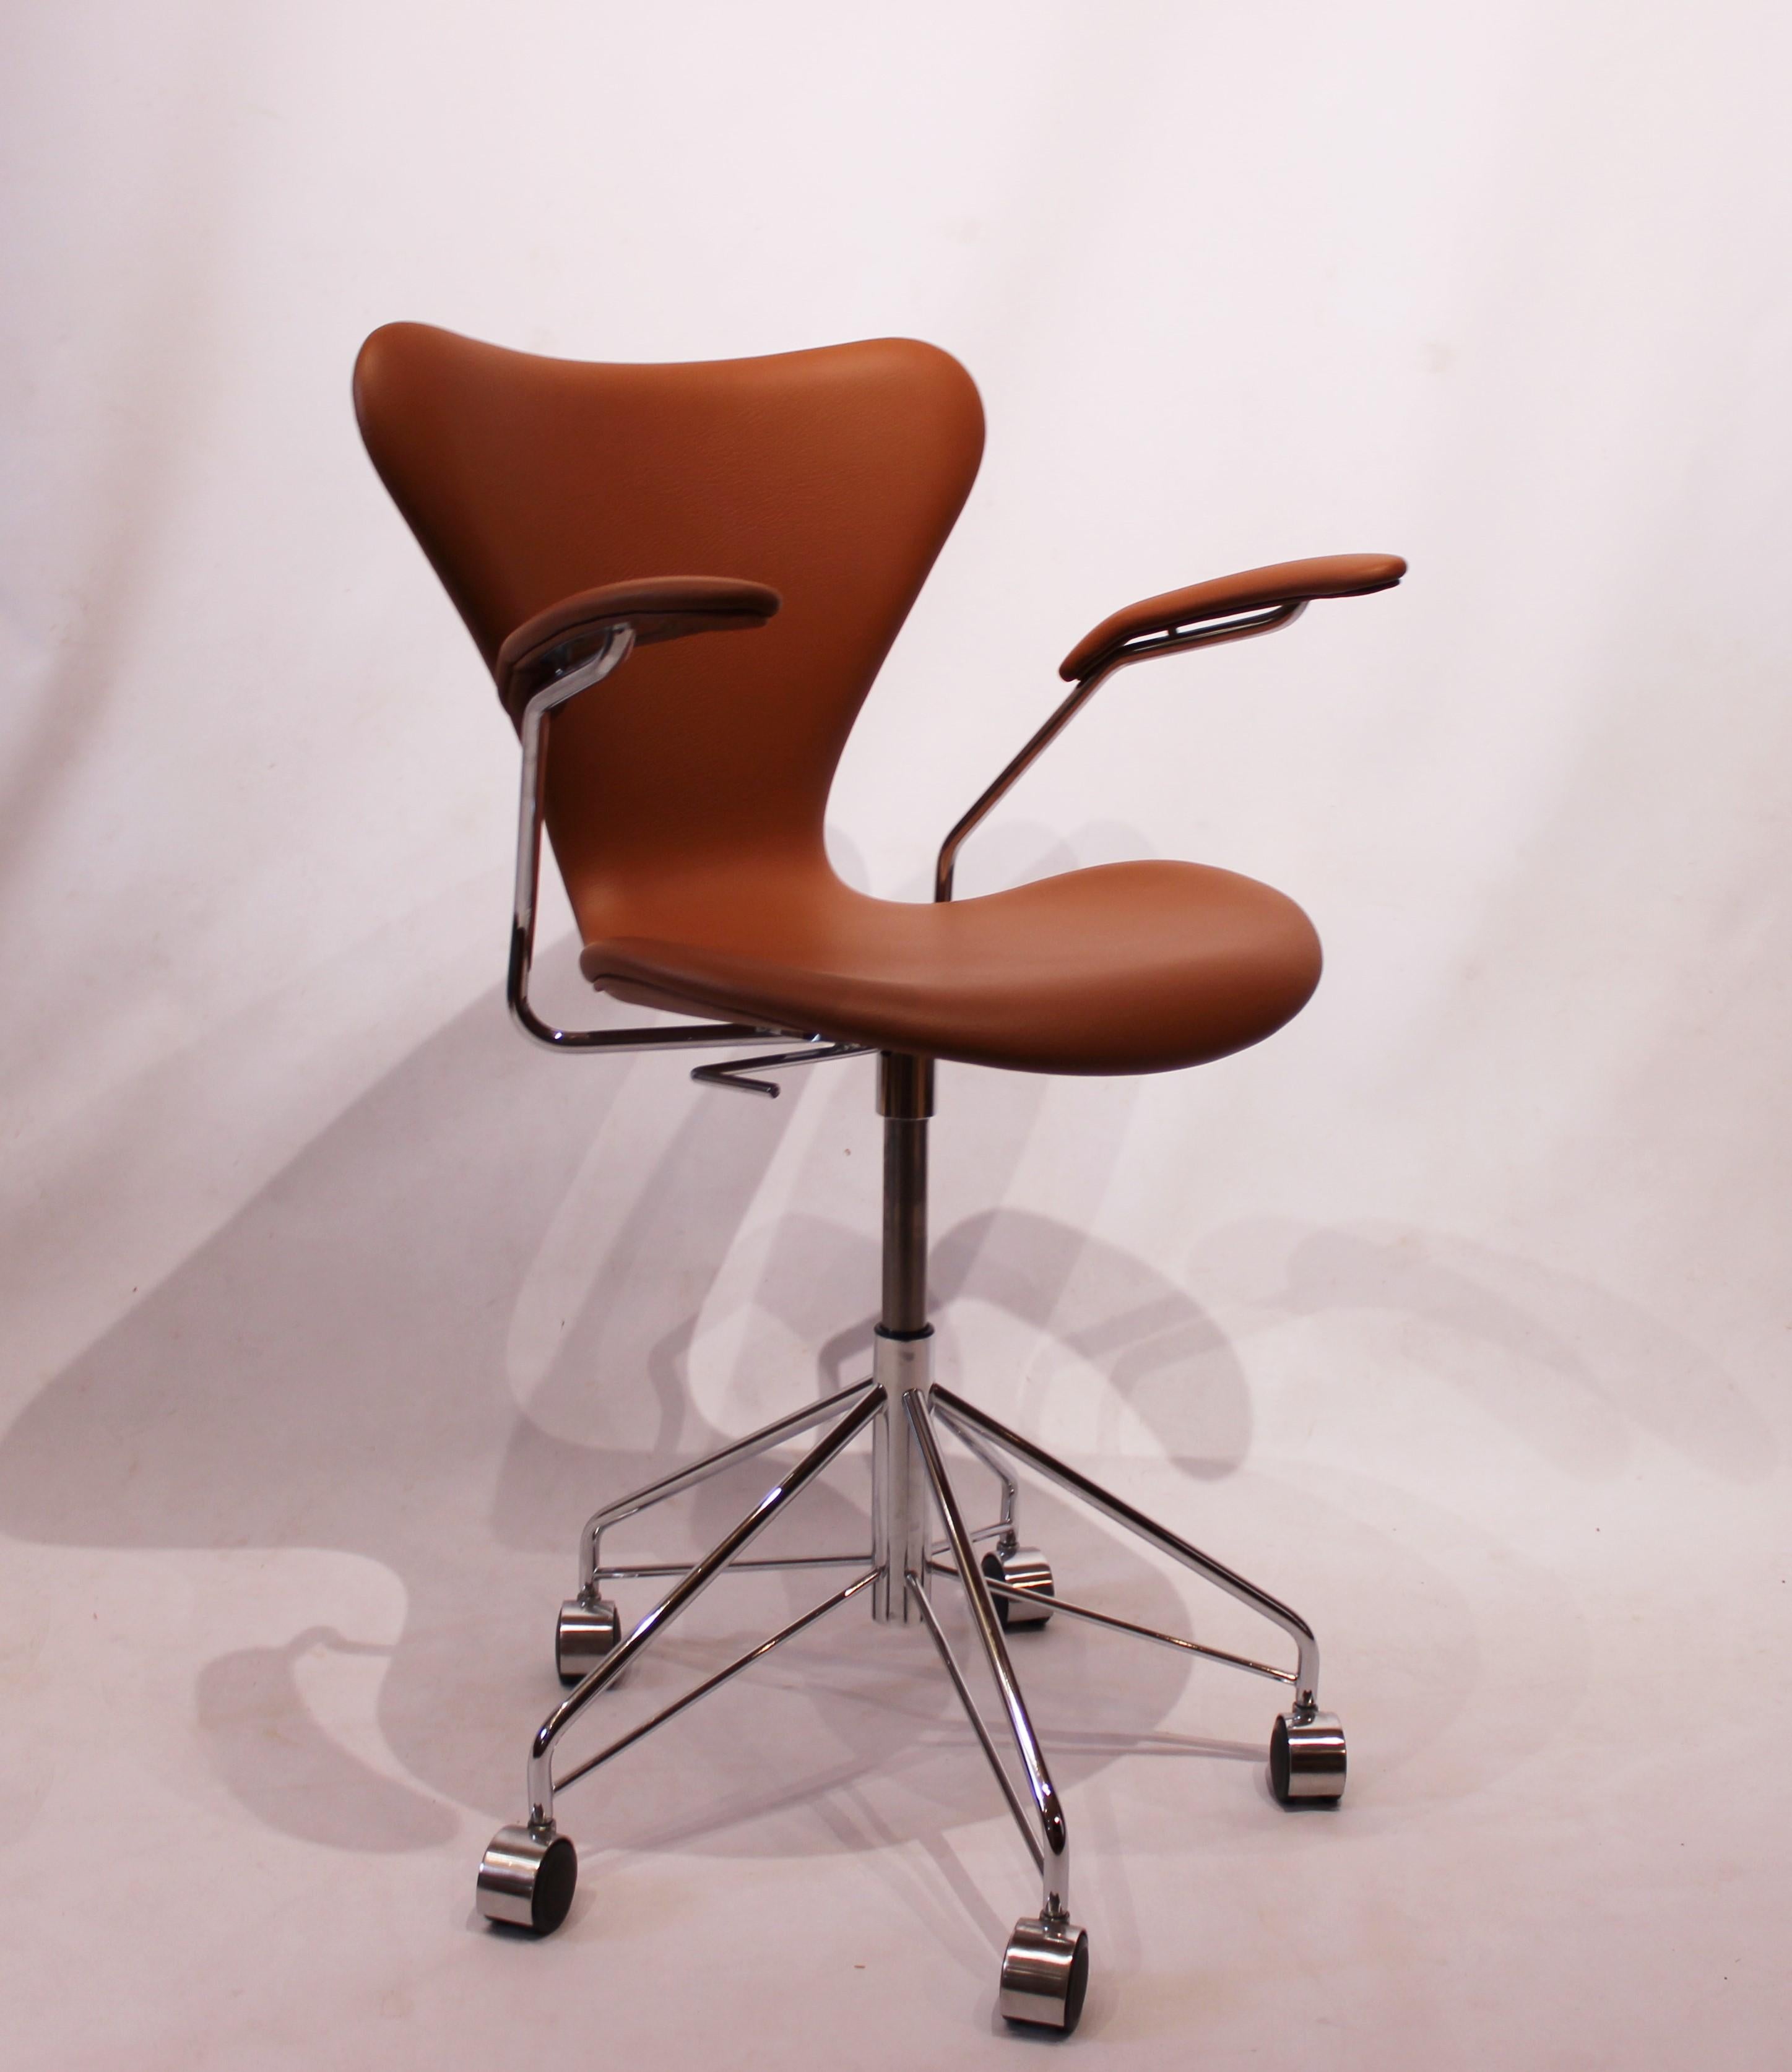 Seven office chair, model 3217, in cognac Classic leather with armrests and swivel function. The chair was designed by Arne Jacobsen in the 1950s and manufactured by Fritz Hansen. The item is in great vintage condition.